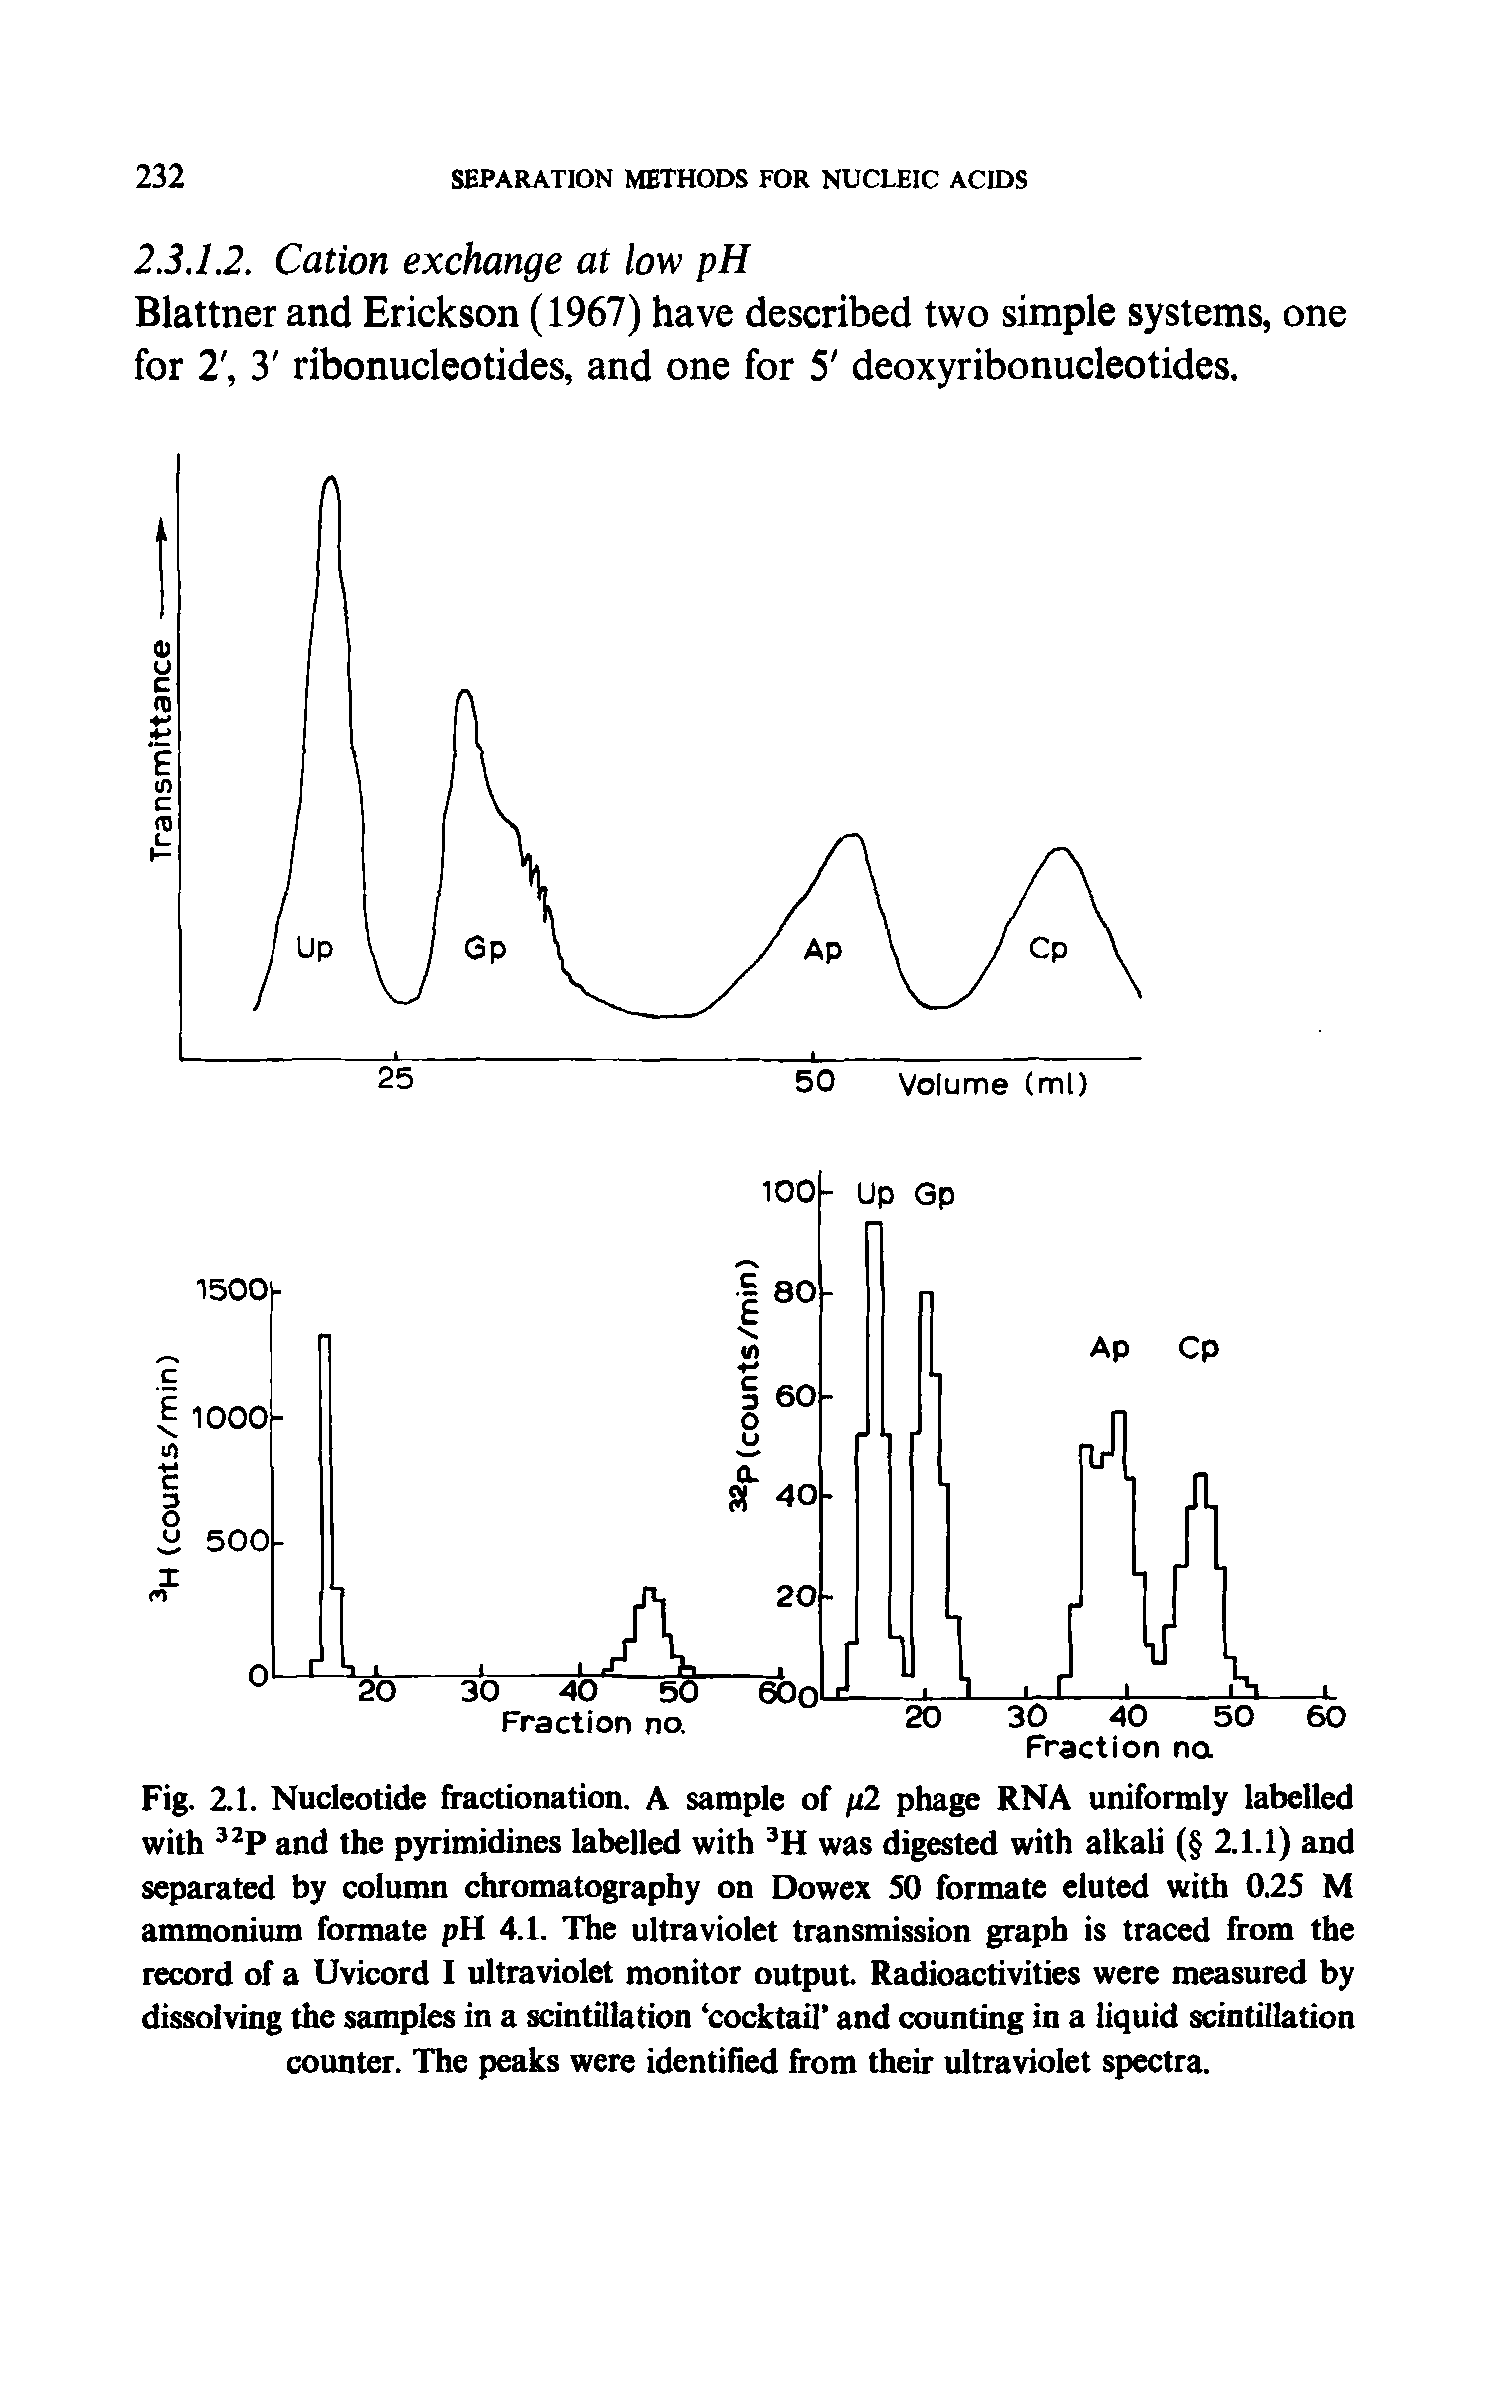 Fig. 2.1. Nucleotide fractionation. A sample of p2 phage RNA uniformly labelled with and the pyrimidines labelled with was digested with alkali ( 2.1.1) and separated by column chromatography on Dowex 50 formate eluted with 0.25 M ammonium formate pH 4.1. The ultraviolet transmission graph is traced from the record of a Uvicord I ultraviolet monitor output Radioactivities were measured by dissolving the samples in a scintillation cocktail and counting in a liquid scintillation counter. The peaks were identified from their ultraviolet spectra.